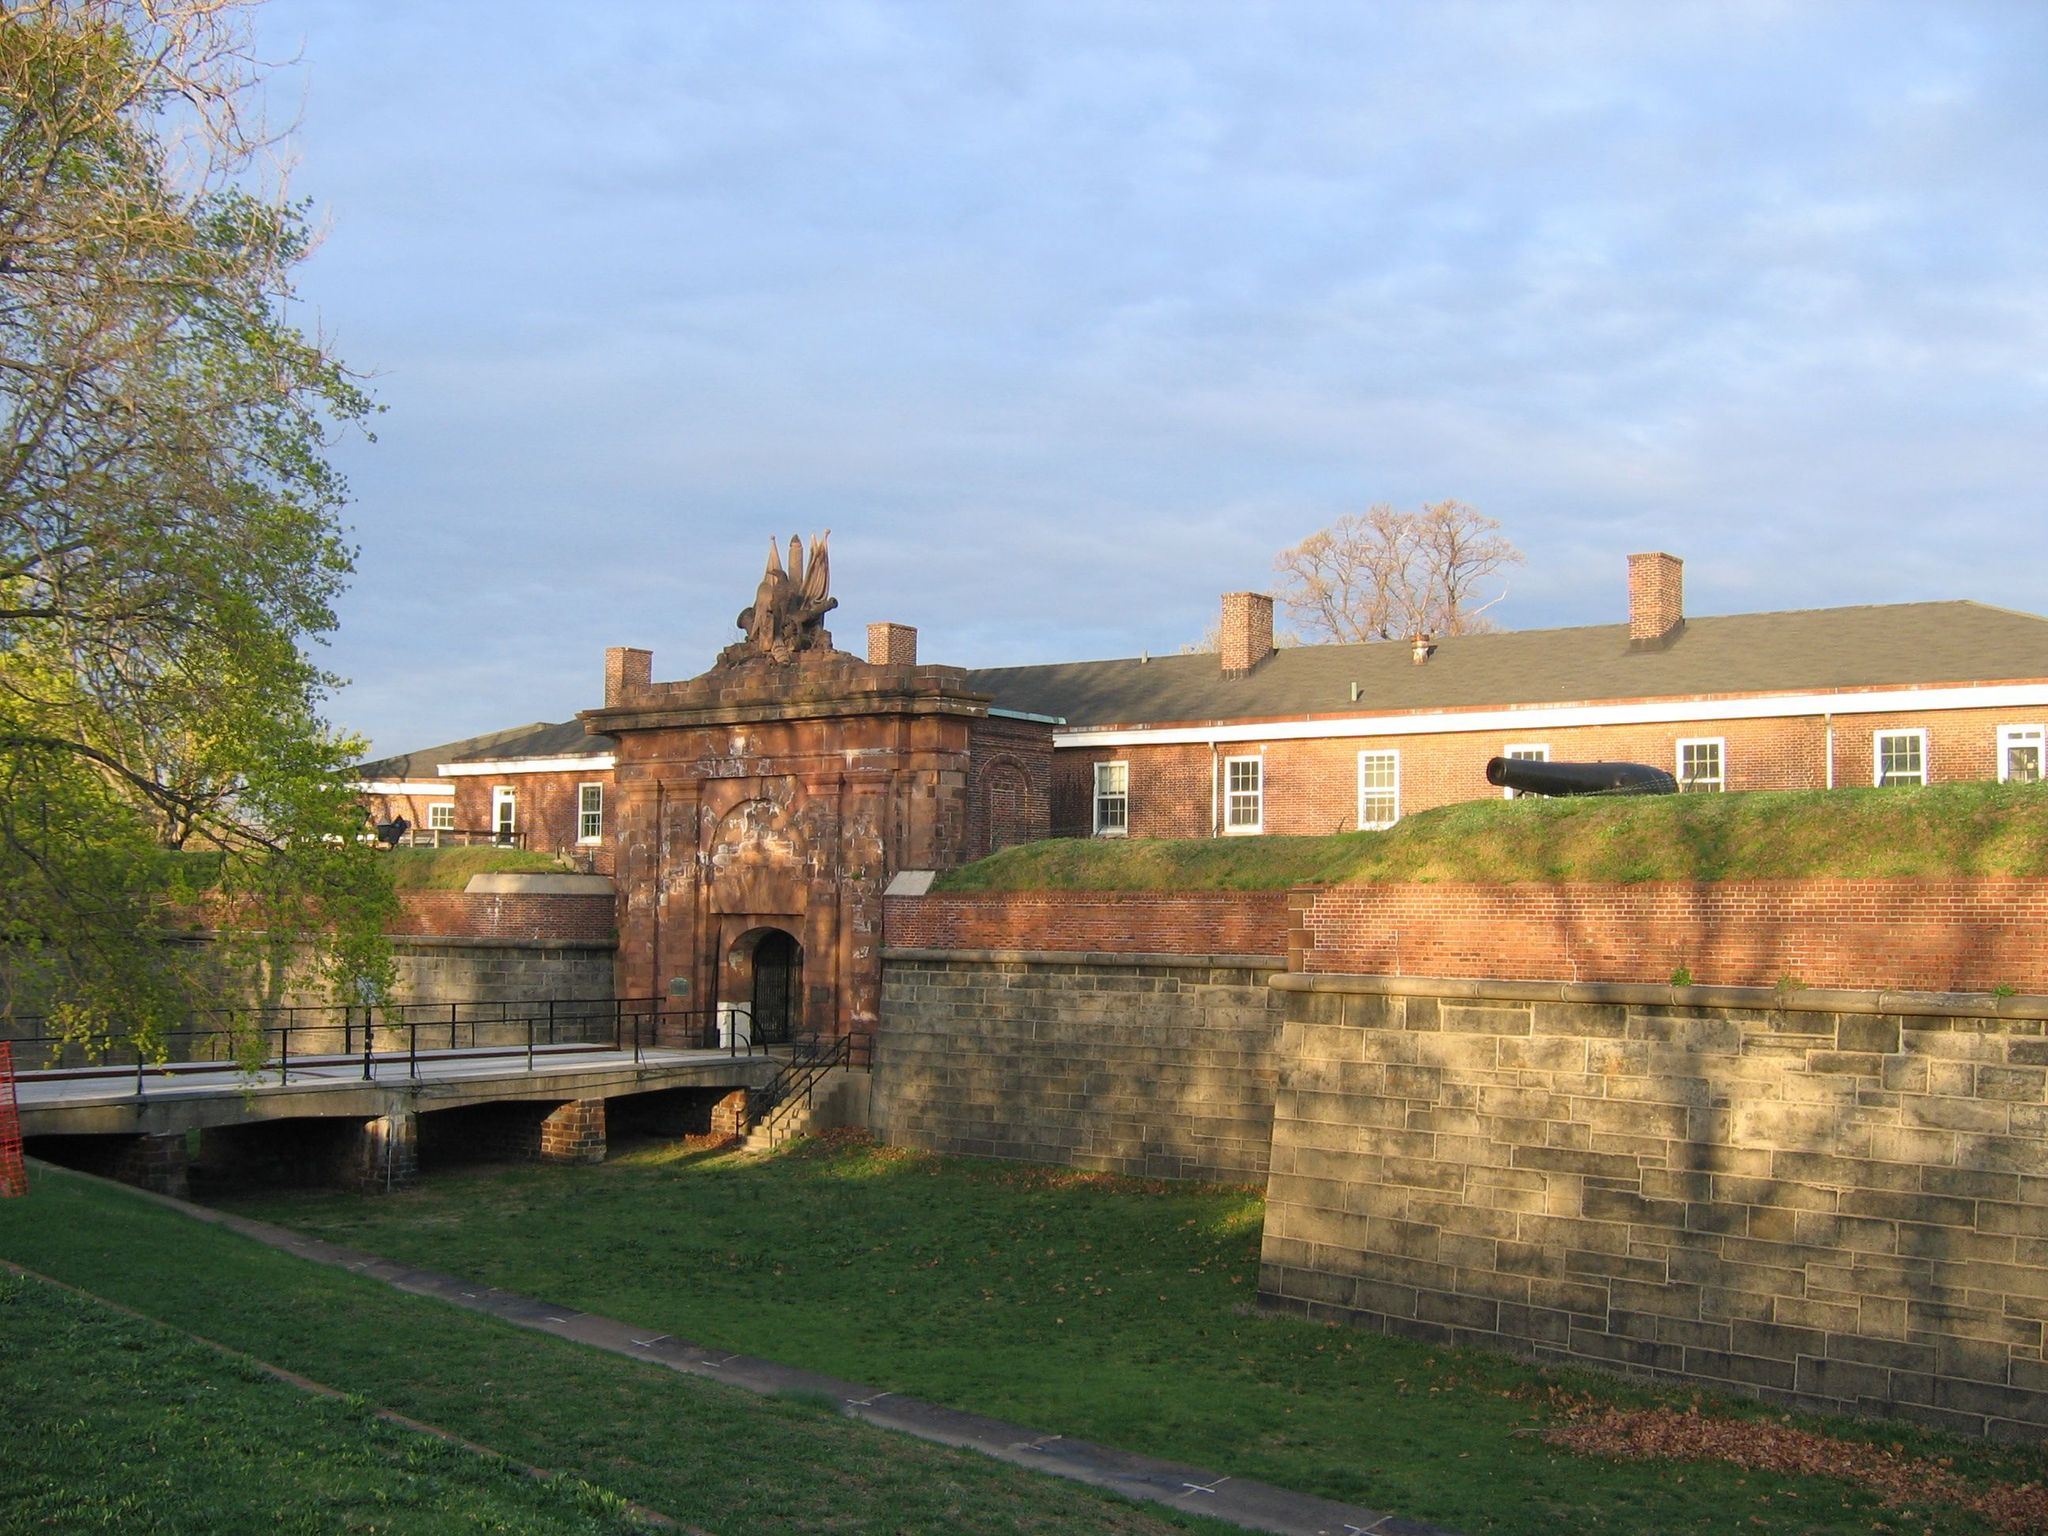 An early spring morning view of Fort Jay. The gate house is the oldest structure on Governors Island dating back to 1794.